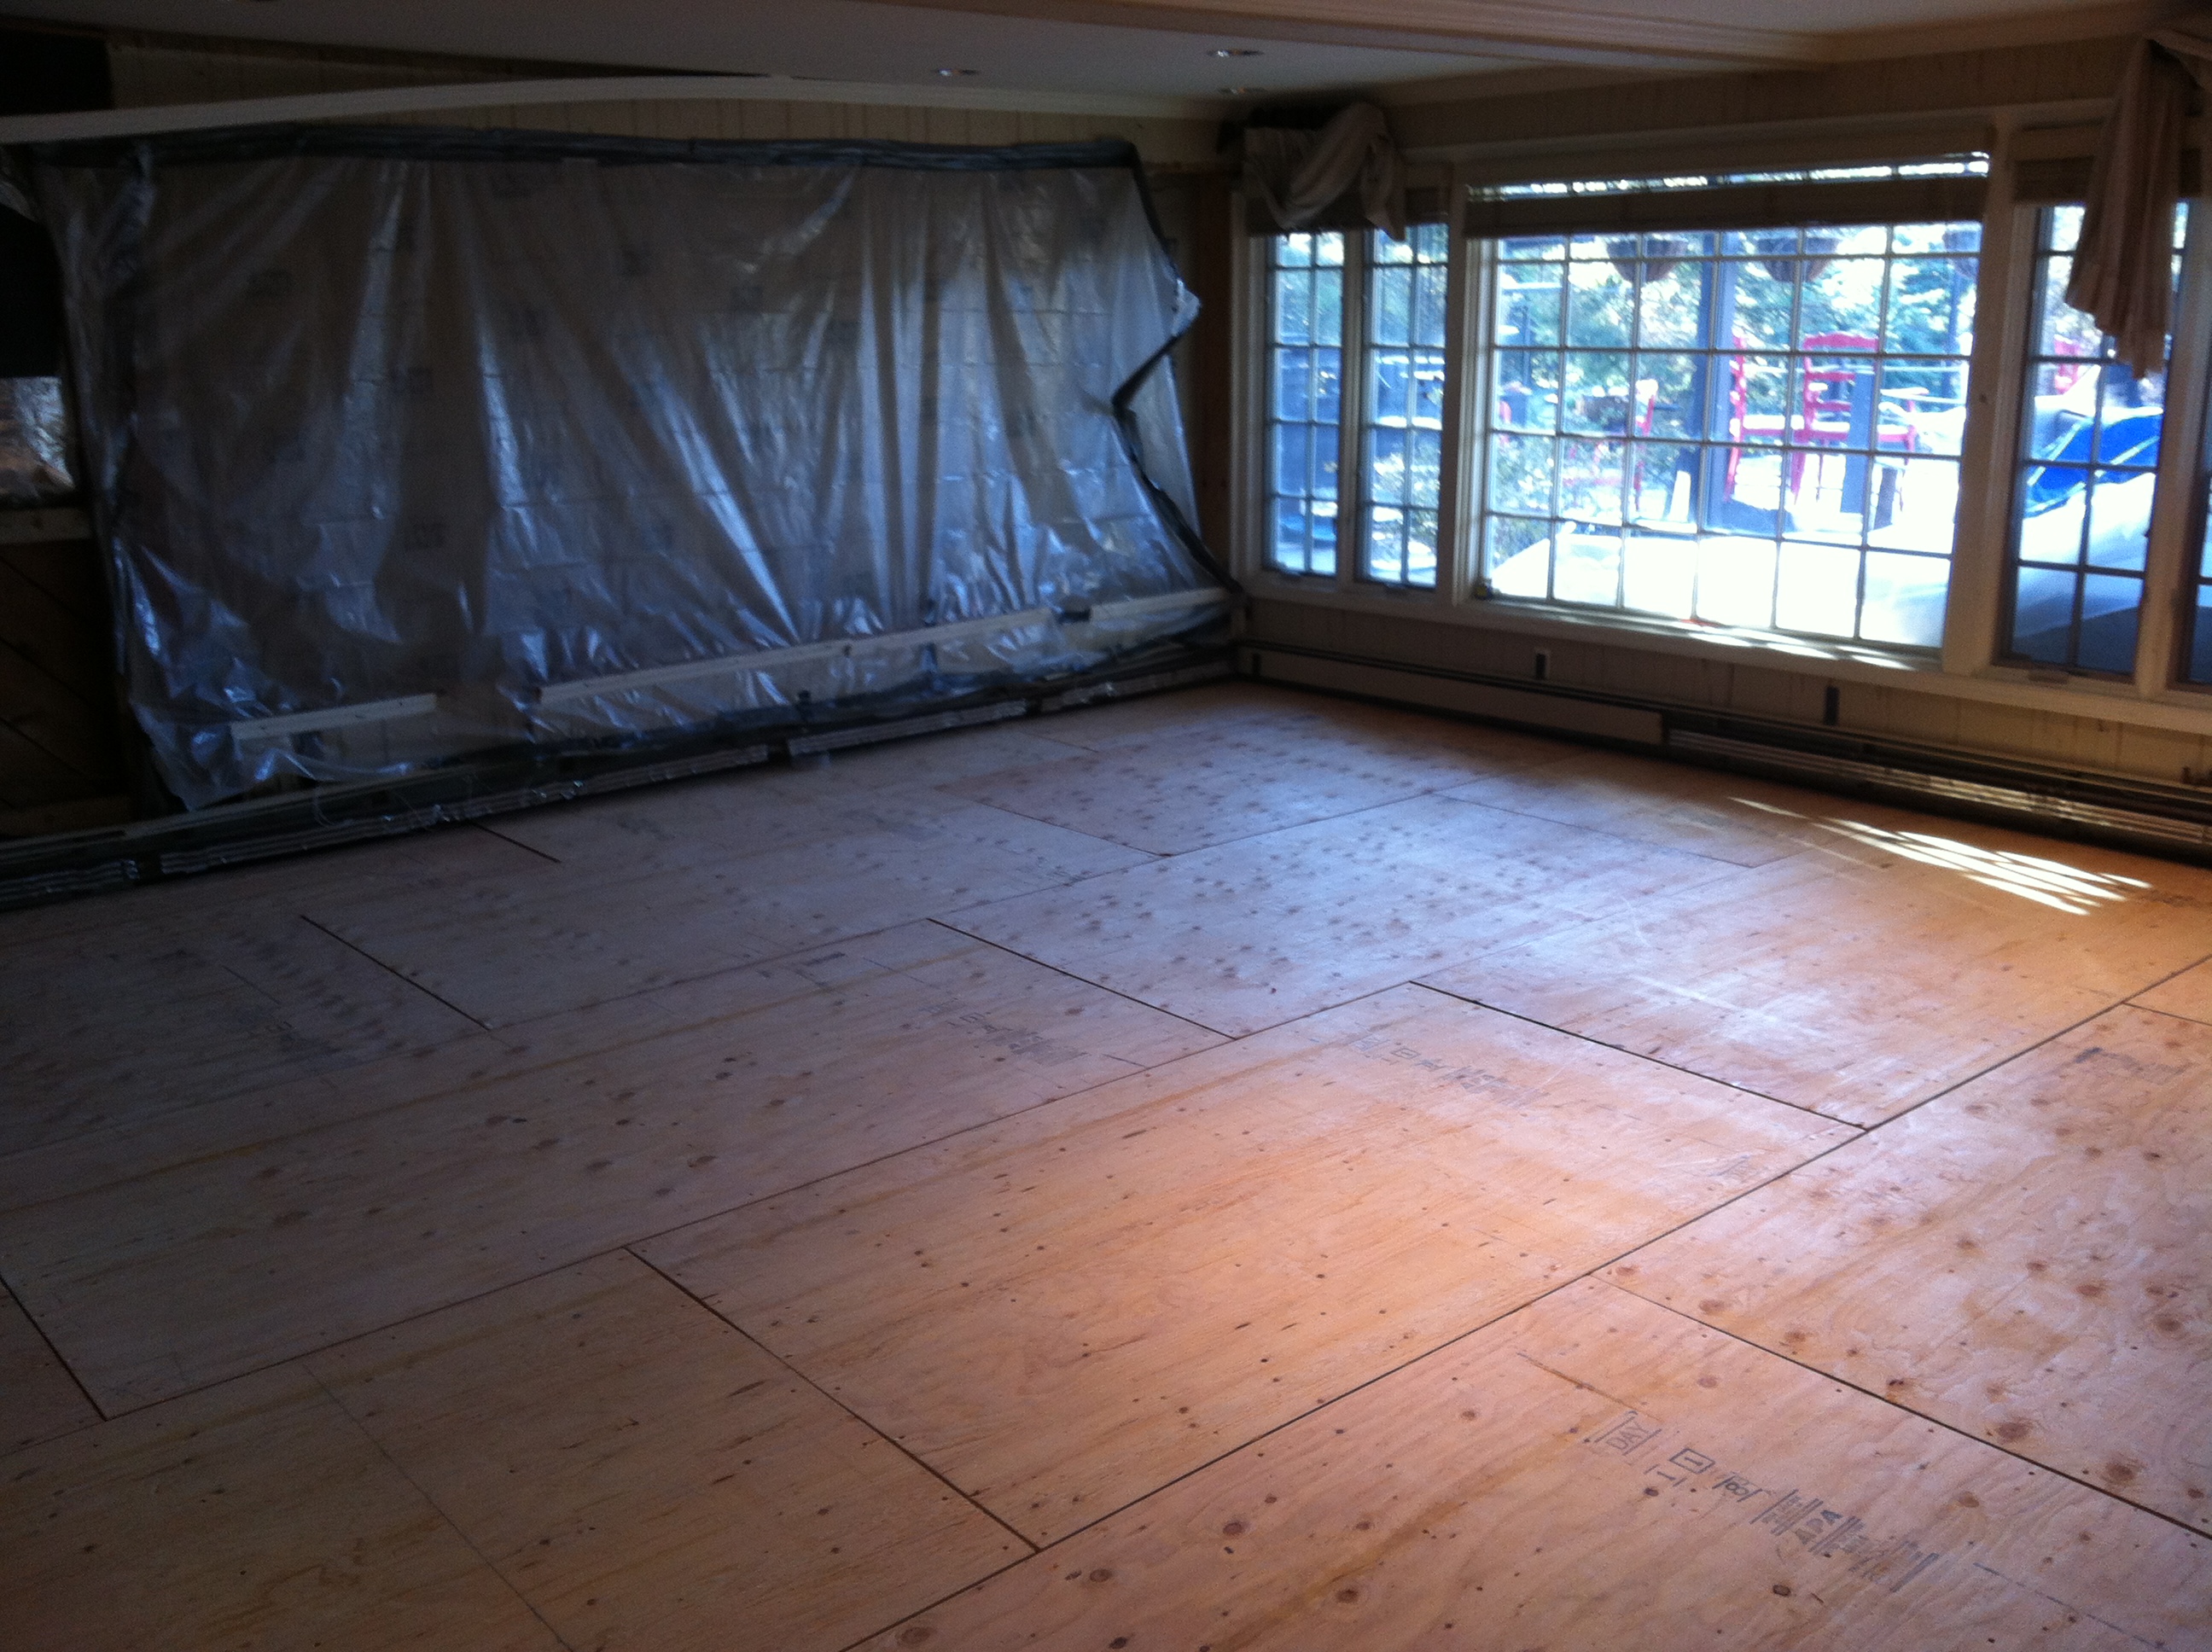 flooring Tiling over old 2x6 tongue and groove subfloor. Underlayment? Levelling? Home